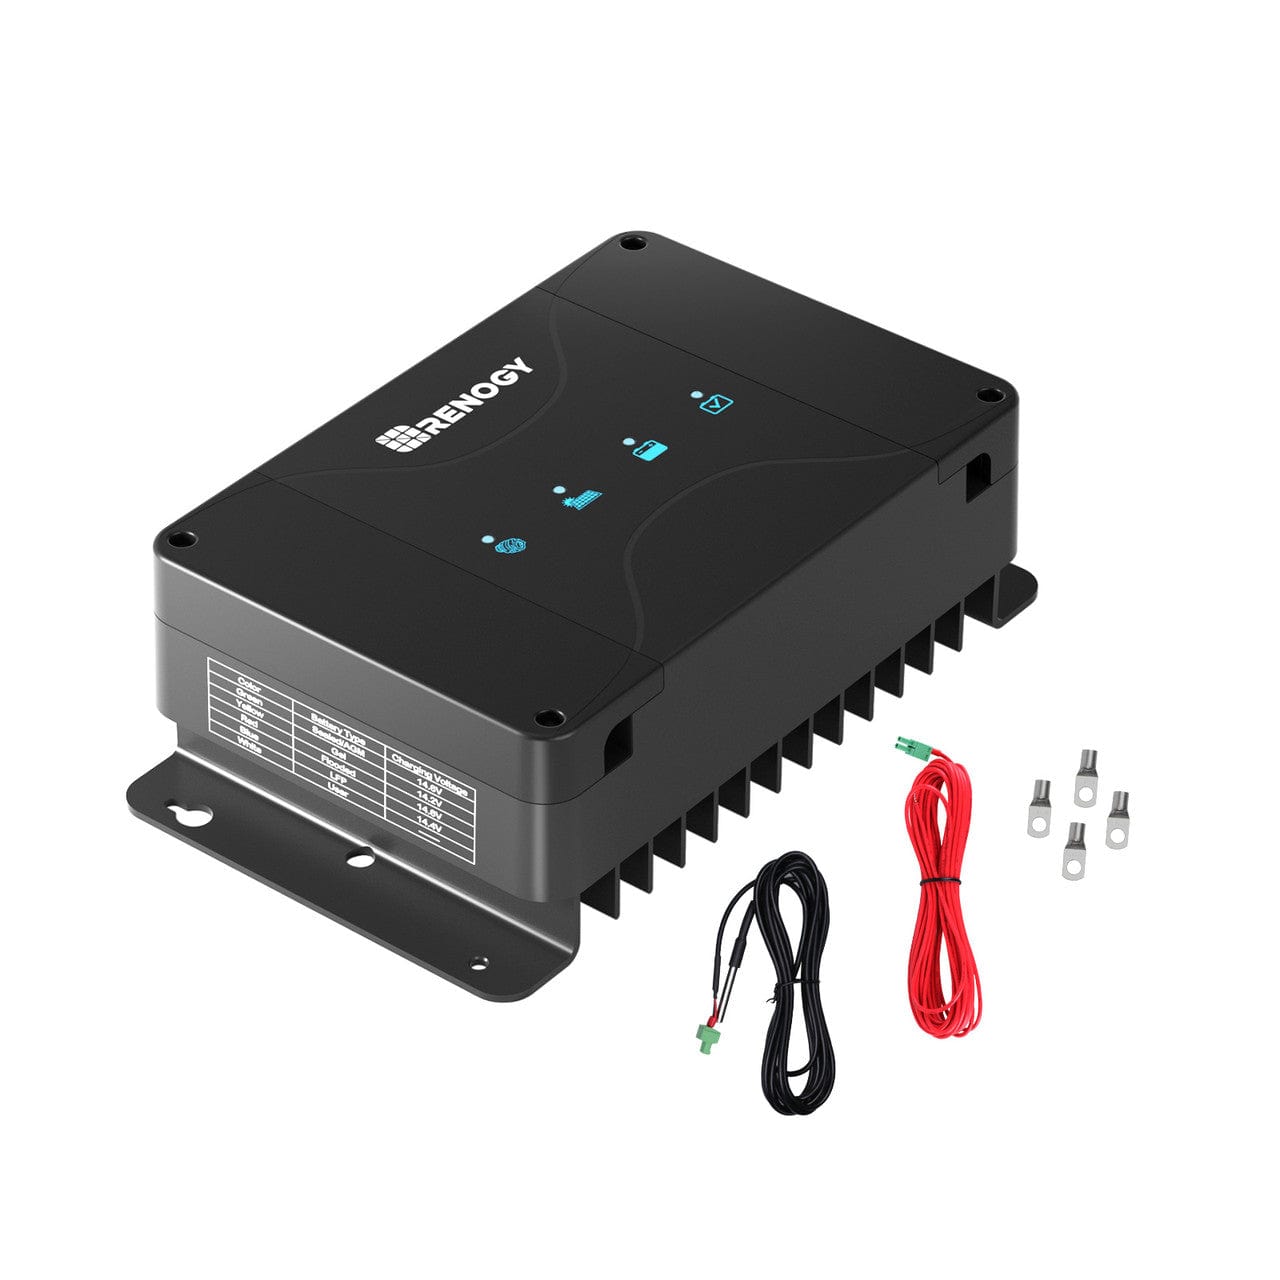 Renogy DCC30S 12V 30A Dual Input DC-DC On-Board Battery Charger with MPPT with Renogy ONE Core Renogy Battery Chargers